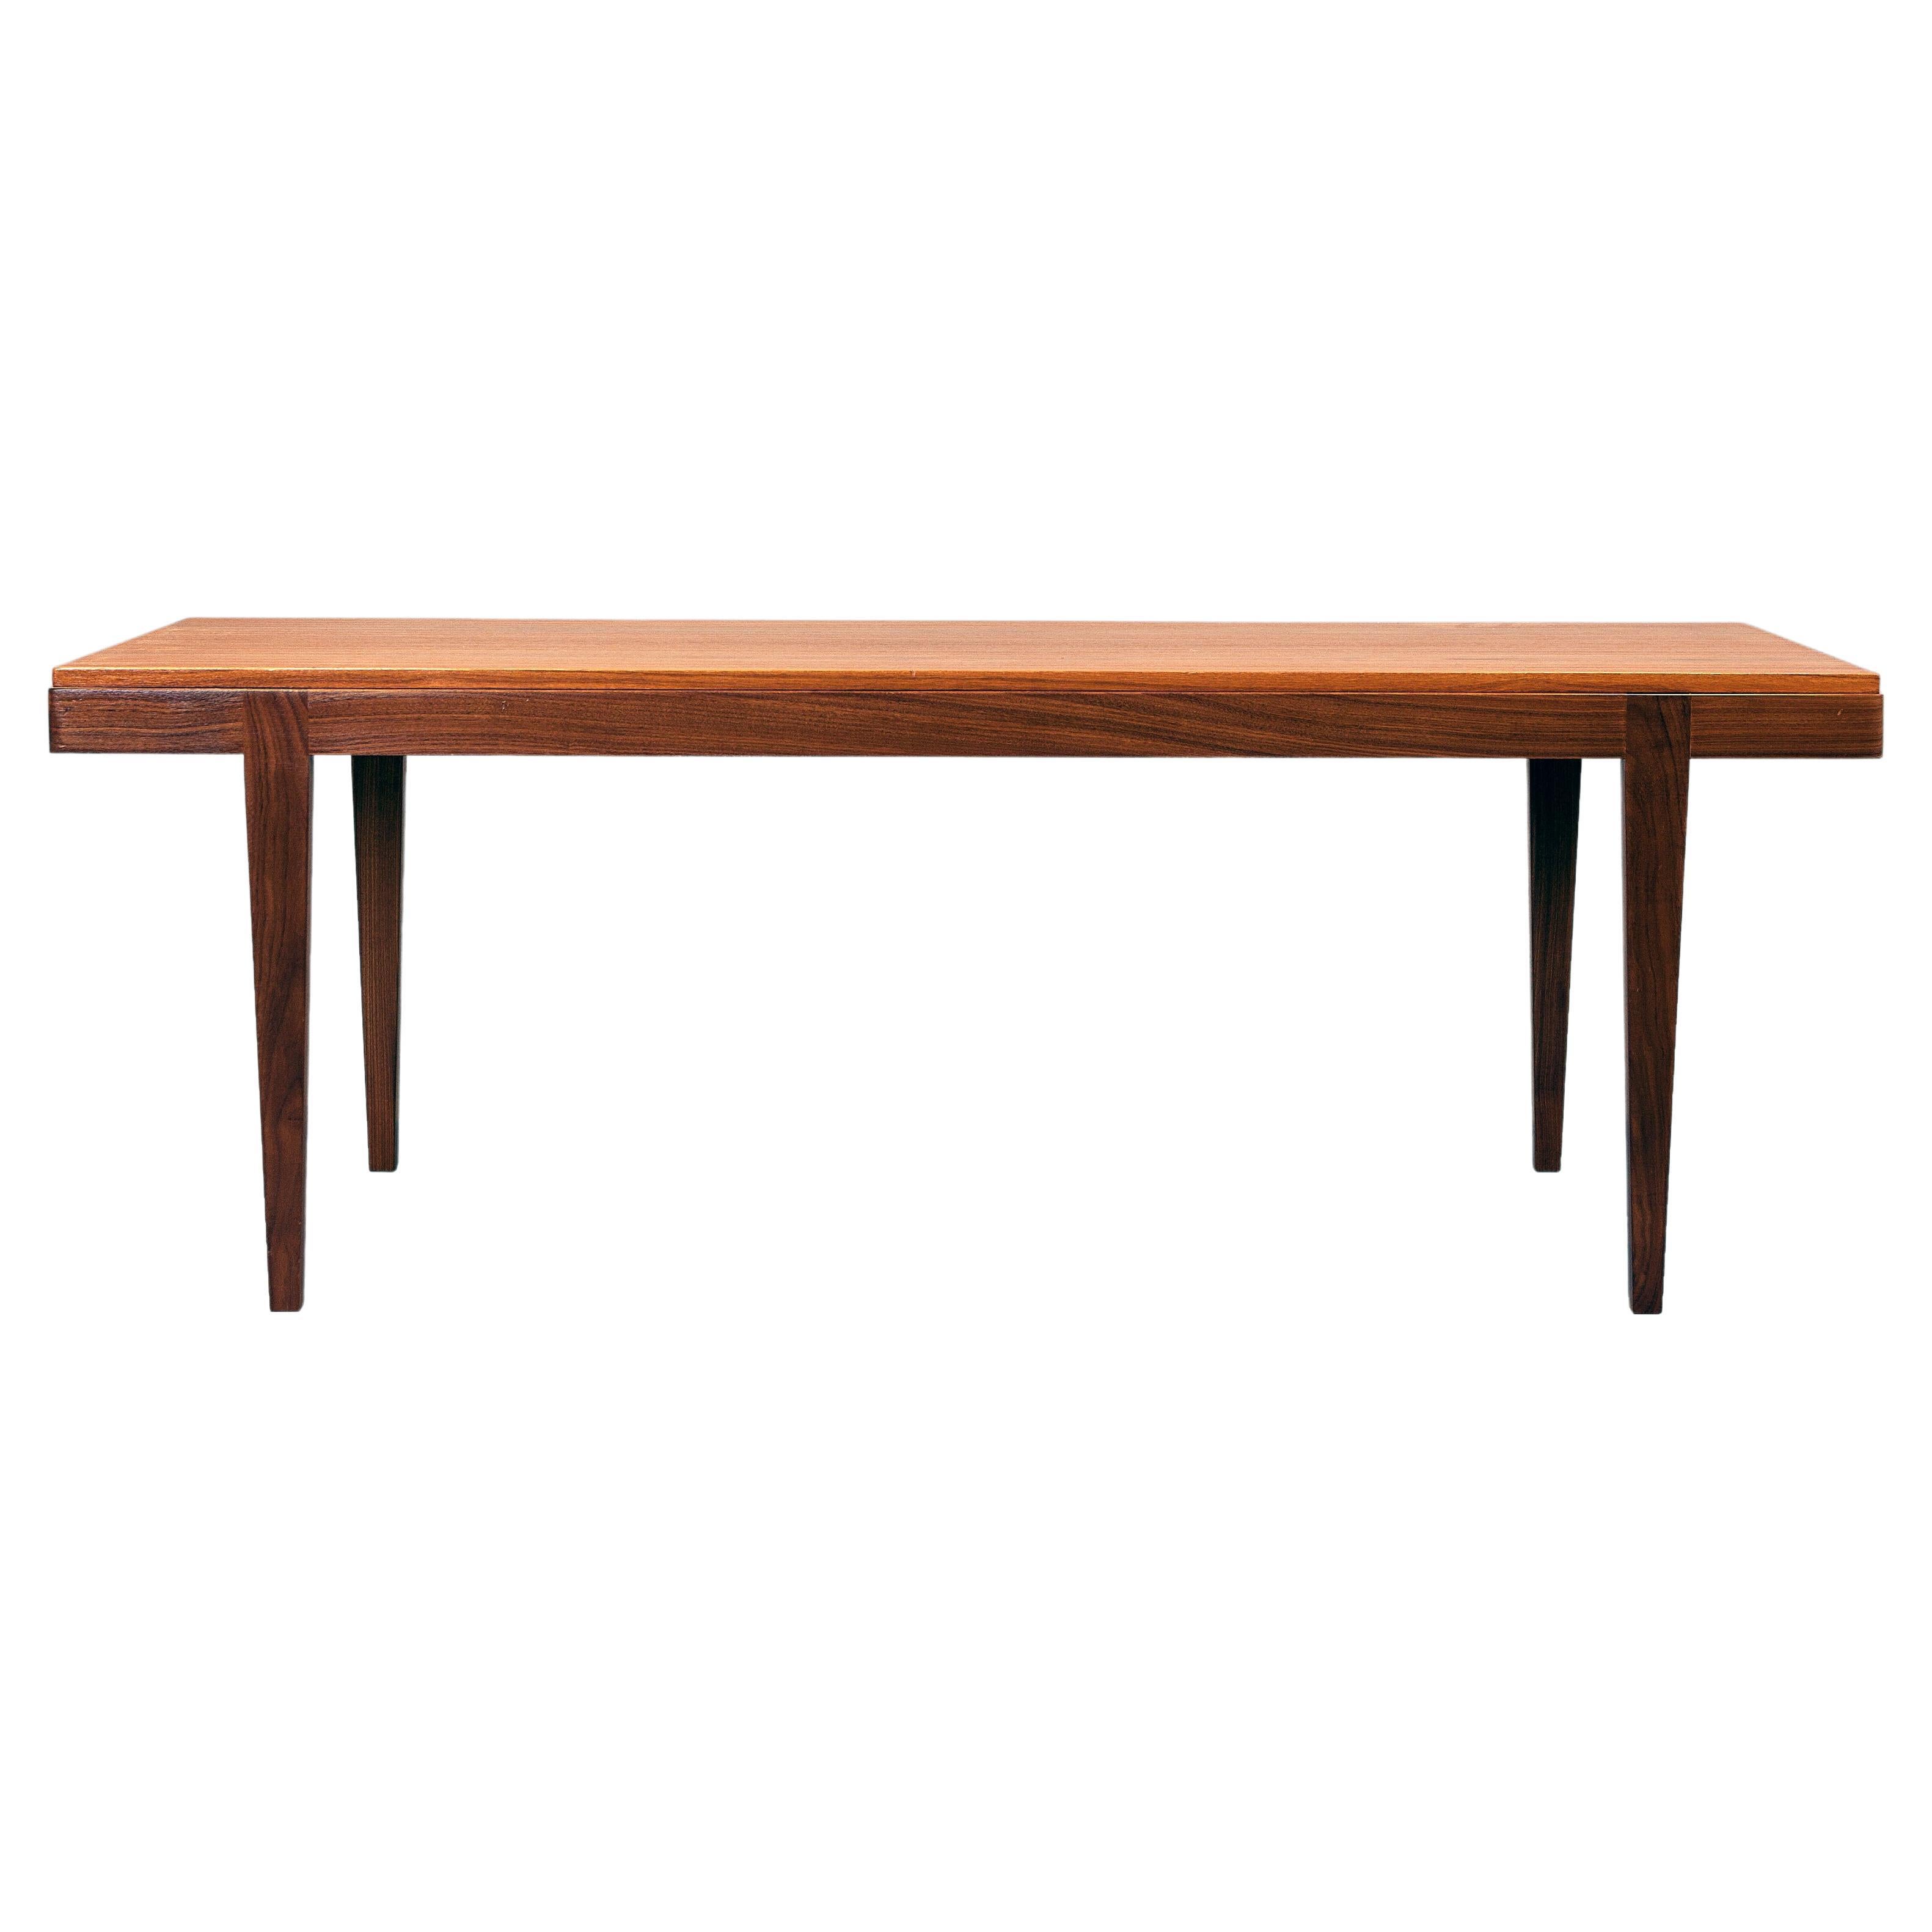 1960s Teak Coffee Table with Extensions in Formica